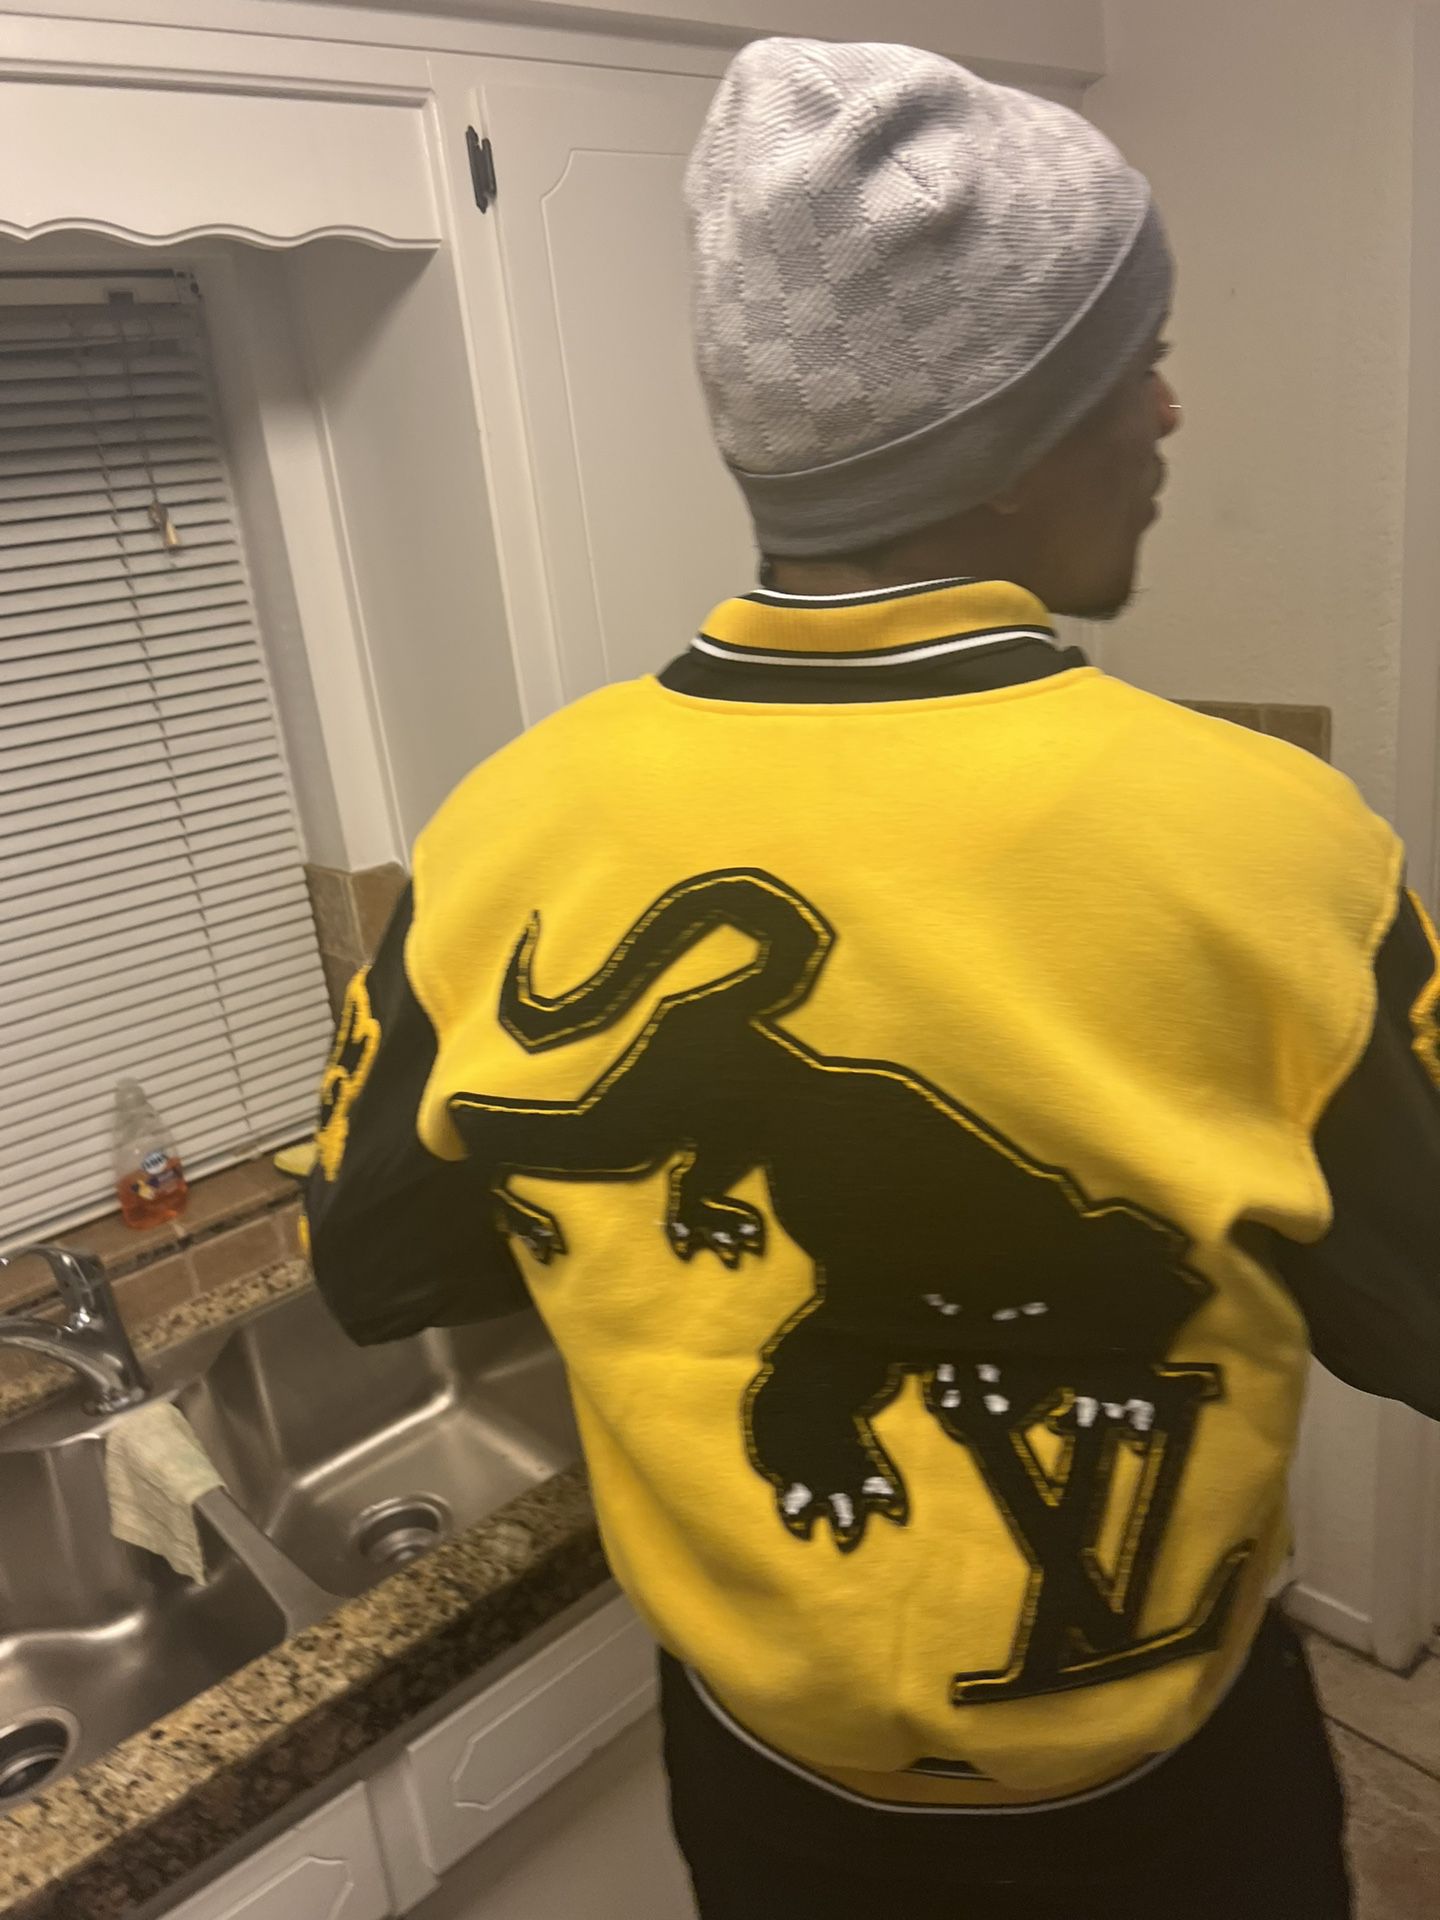 Louis Vuitton Varsity Jacket for Sale in Pico Rivera, CA - OfferUp